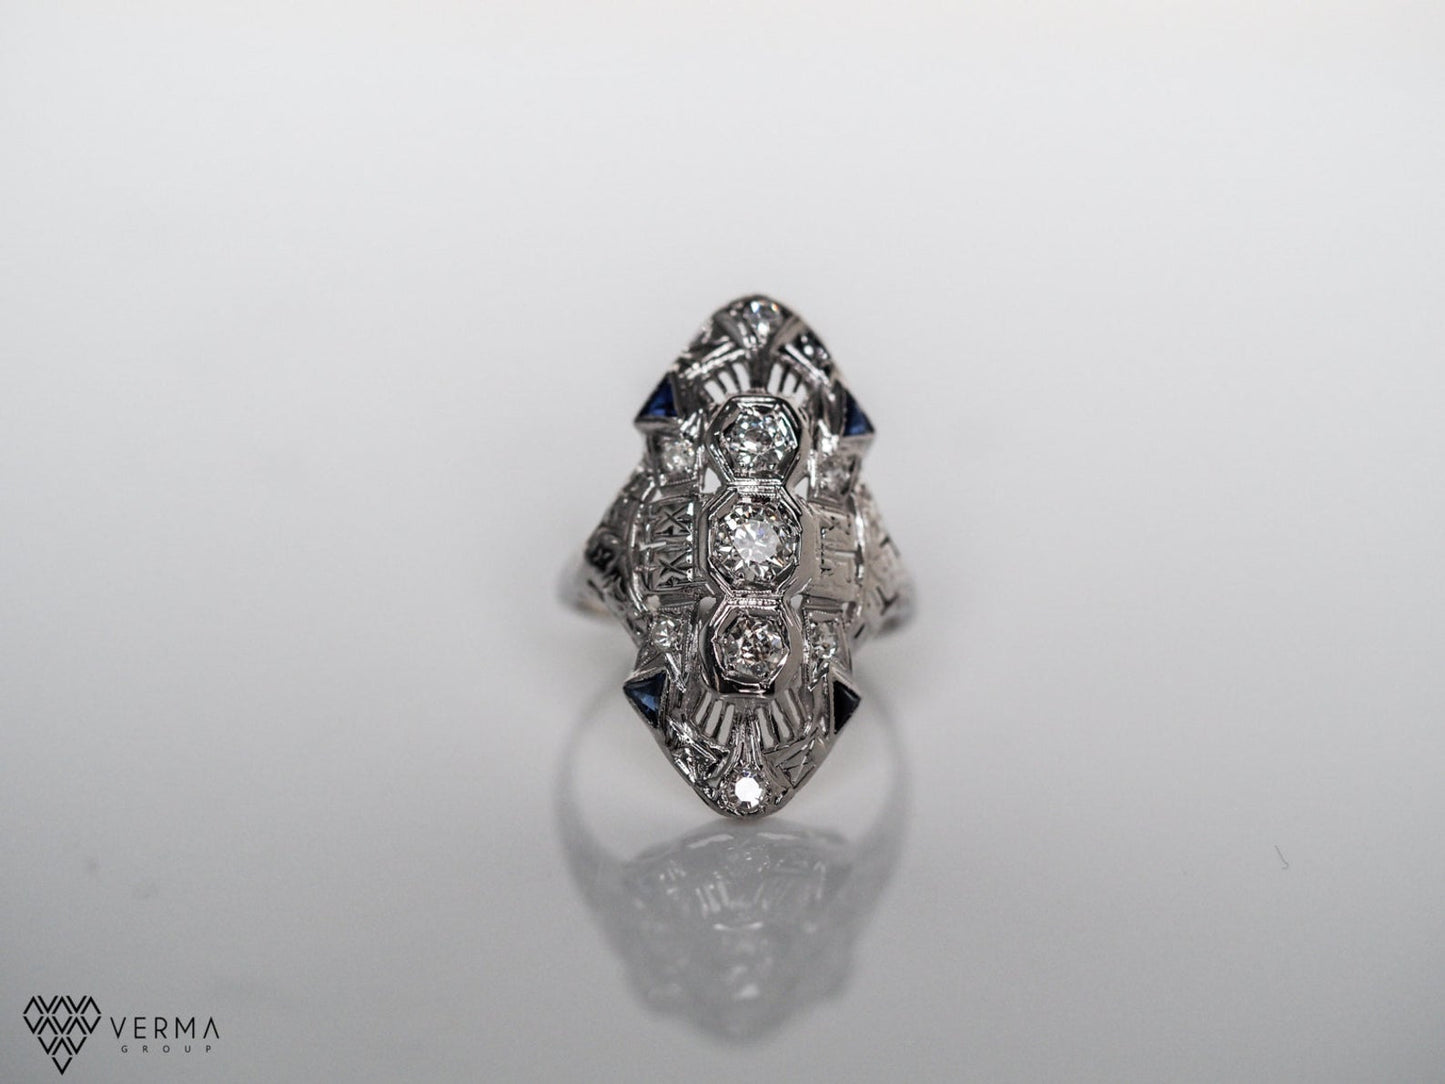 Circa 1920 - Art Deco 18K White Gold Antique Engagement Shield Ring with Sapphires and Old European Cut Diamonds - VEG#338